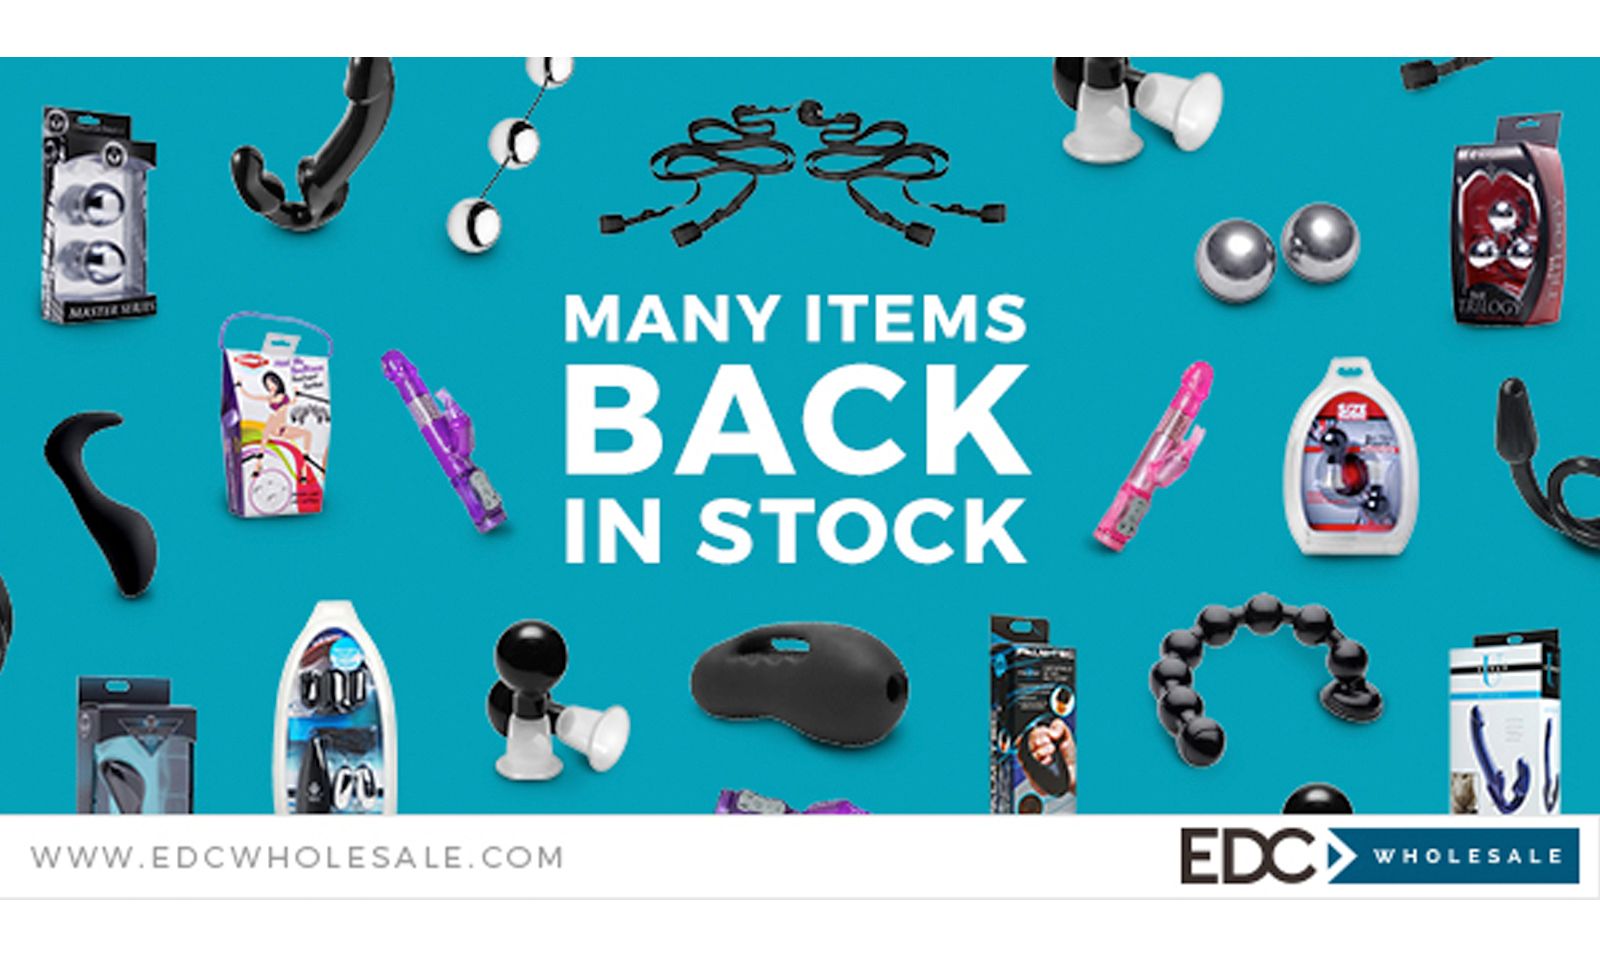 EDC Wholesale Announces Many Items Back in Stock